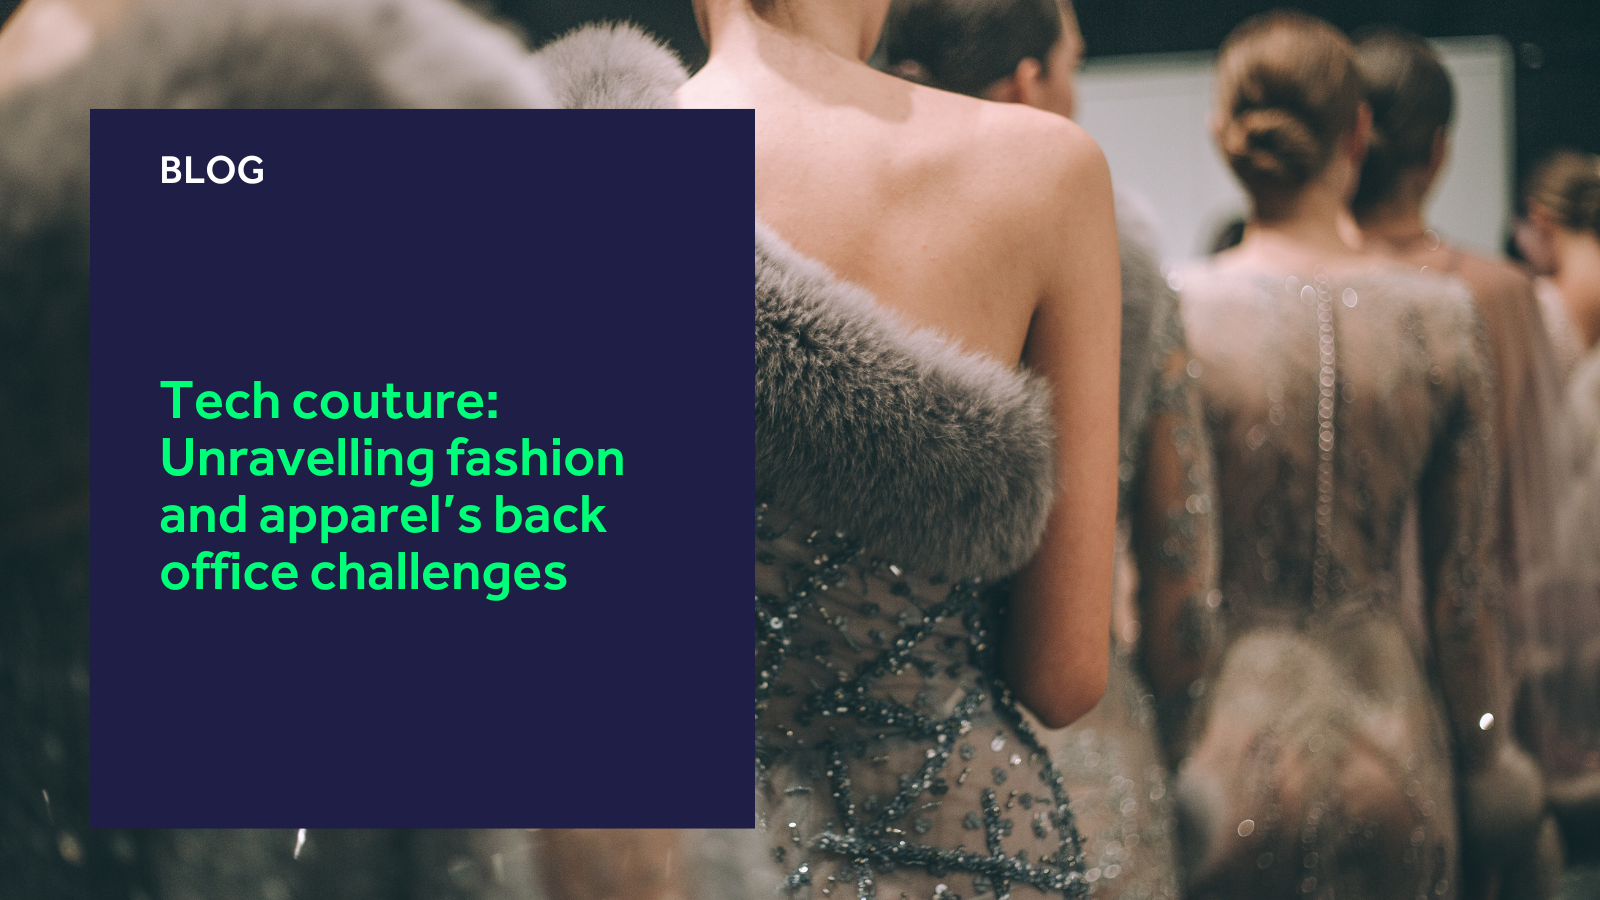 Tech couture: Unravelling fashion and apparel’s back office challenges blog header